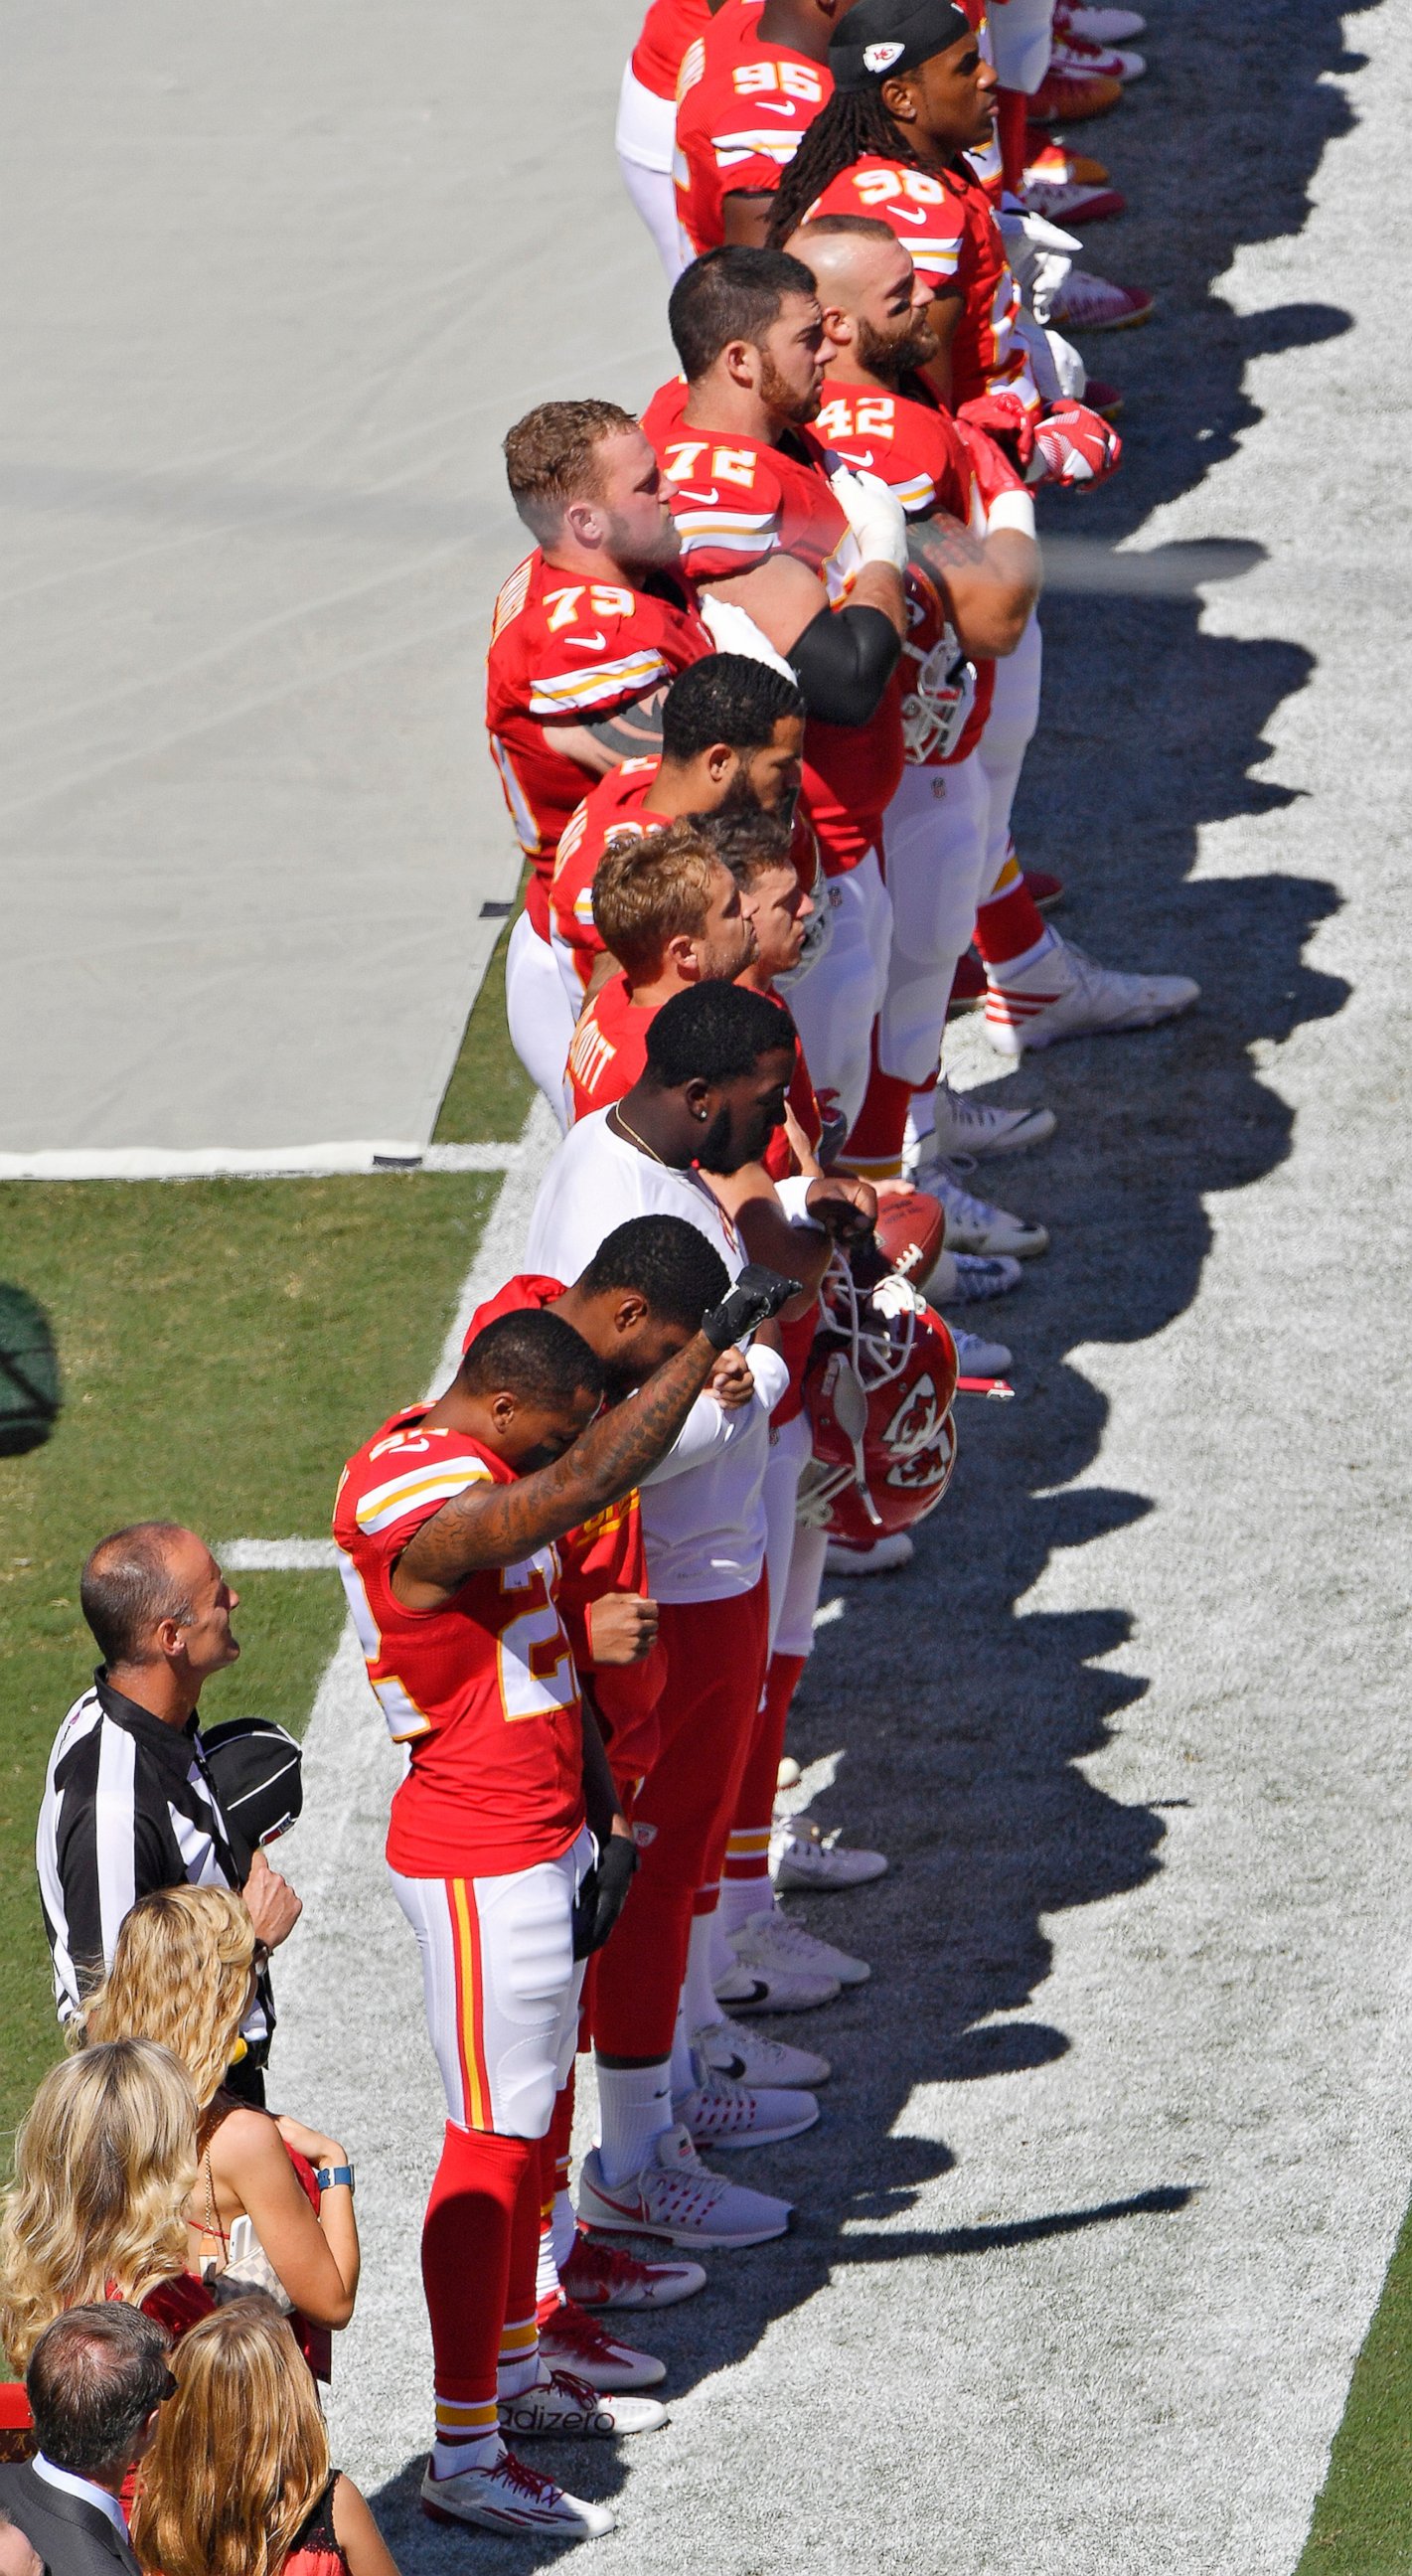 PHOTO: Kansas City Chiefs defensive back Marcus Peters raises his fist in the air as the National Anthem plays before Sunday's football game against the San Diego Chargers, Sept. 11, 2016 at Arrowhead Stadium in Kansas City, Missouri.